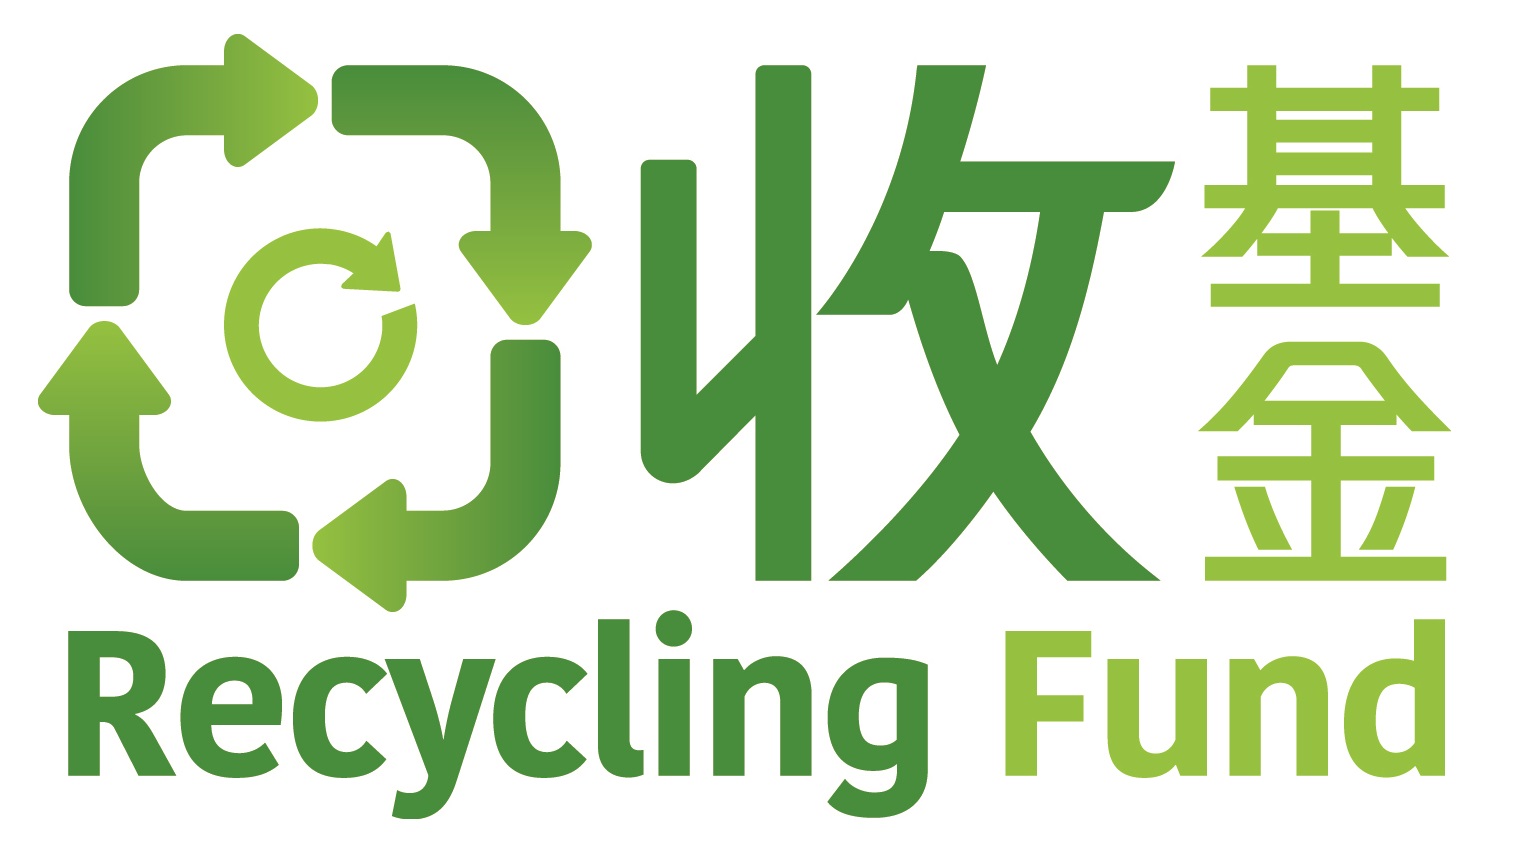 Recycling Fund